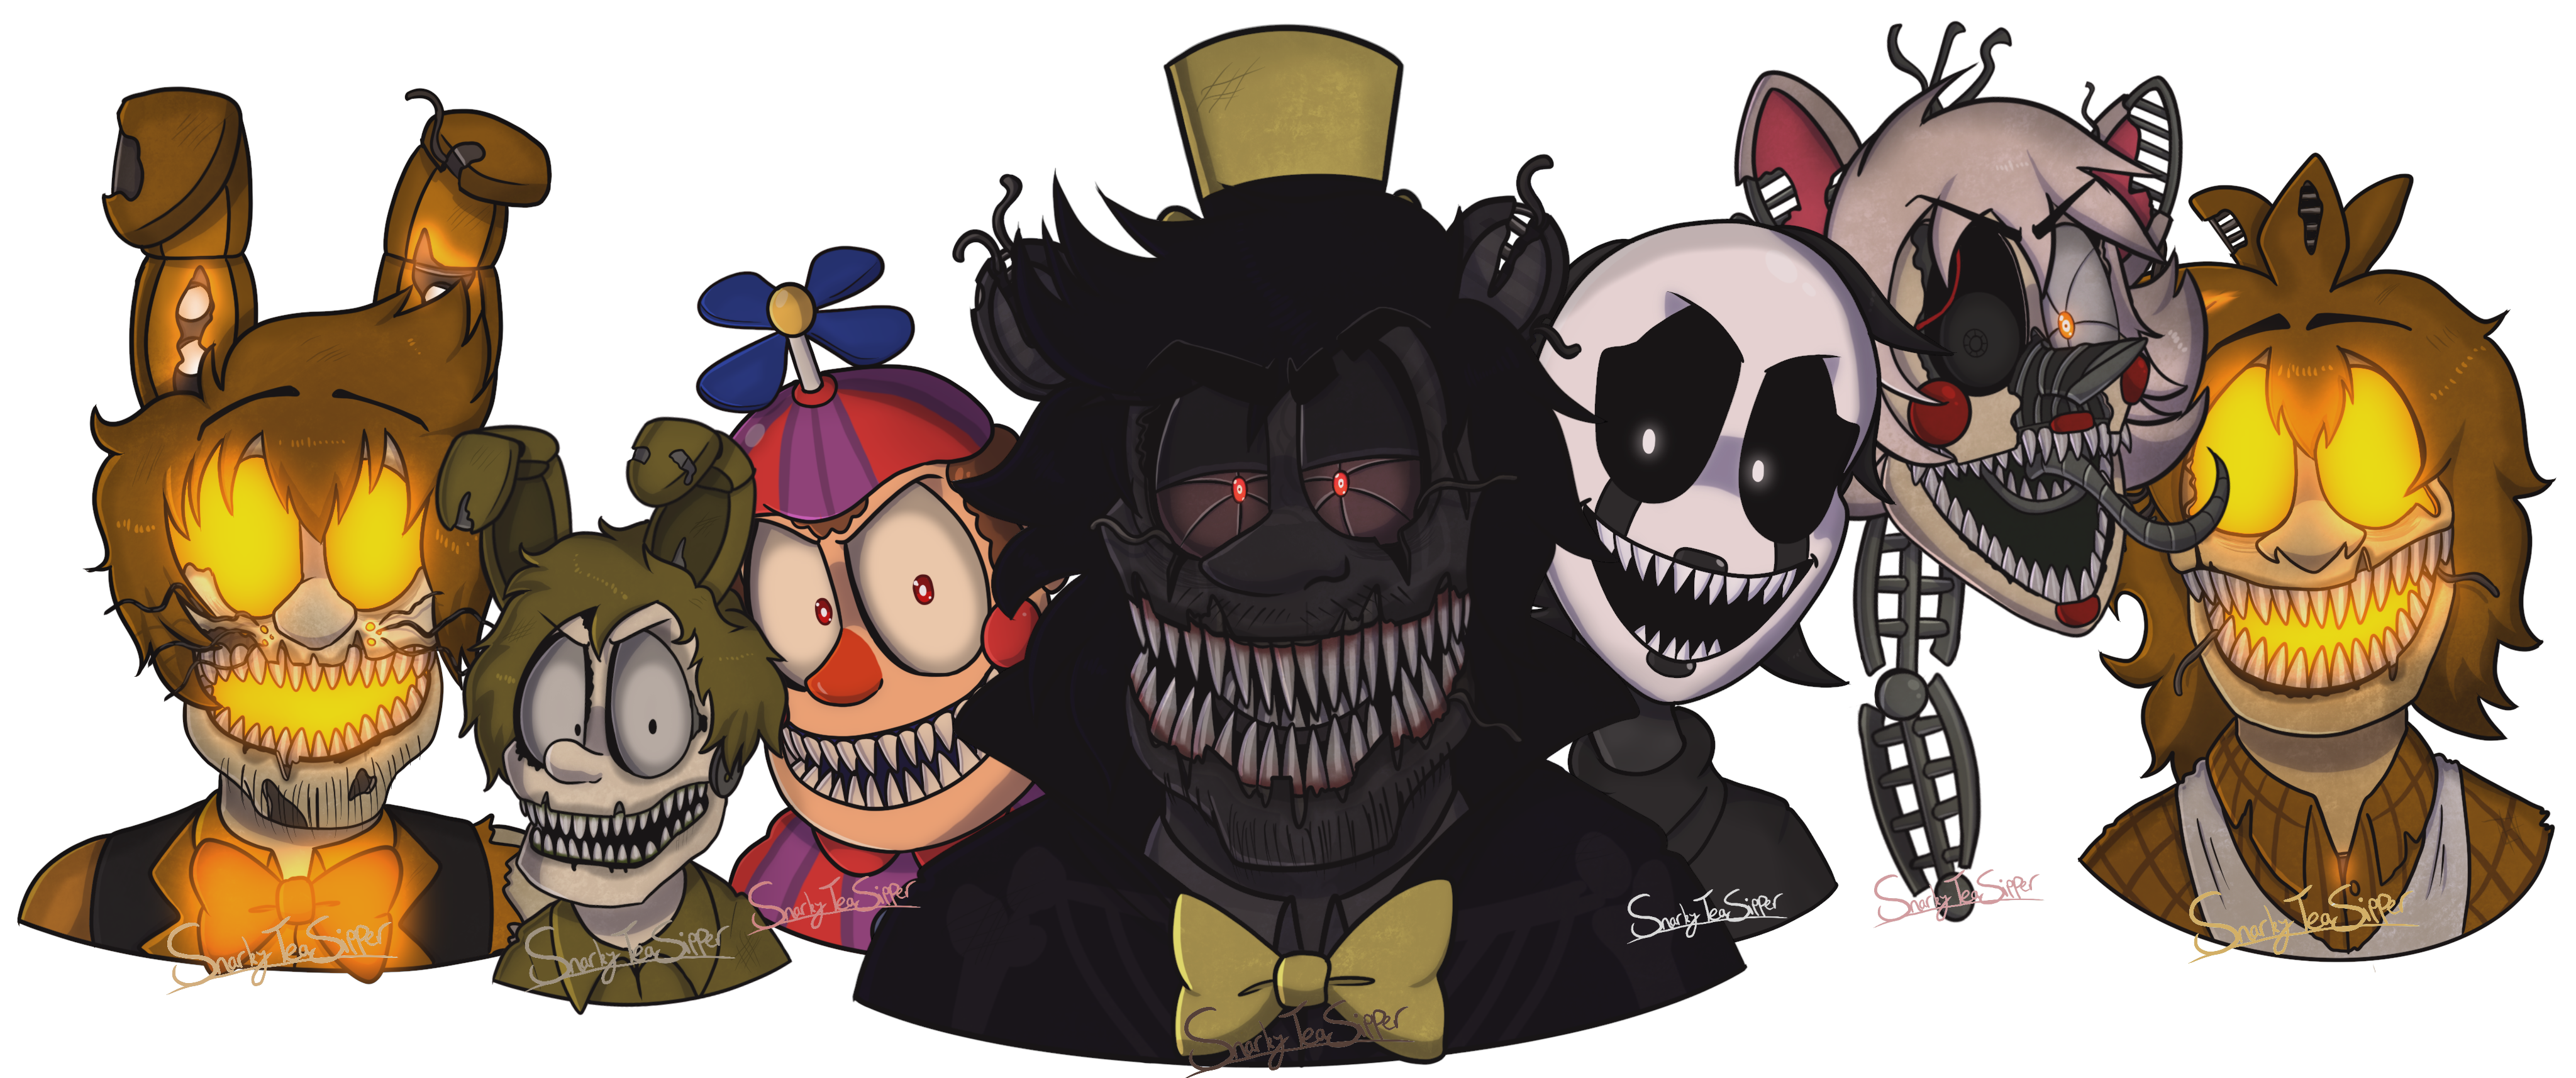 Five Nights at Freddy's 4 Halloween Edition by puppet-12 on DeviantArt